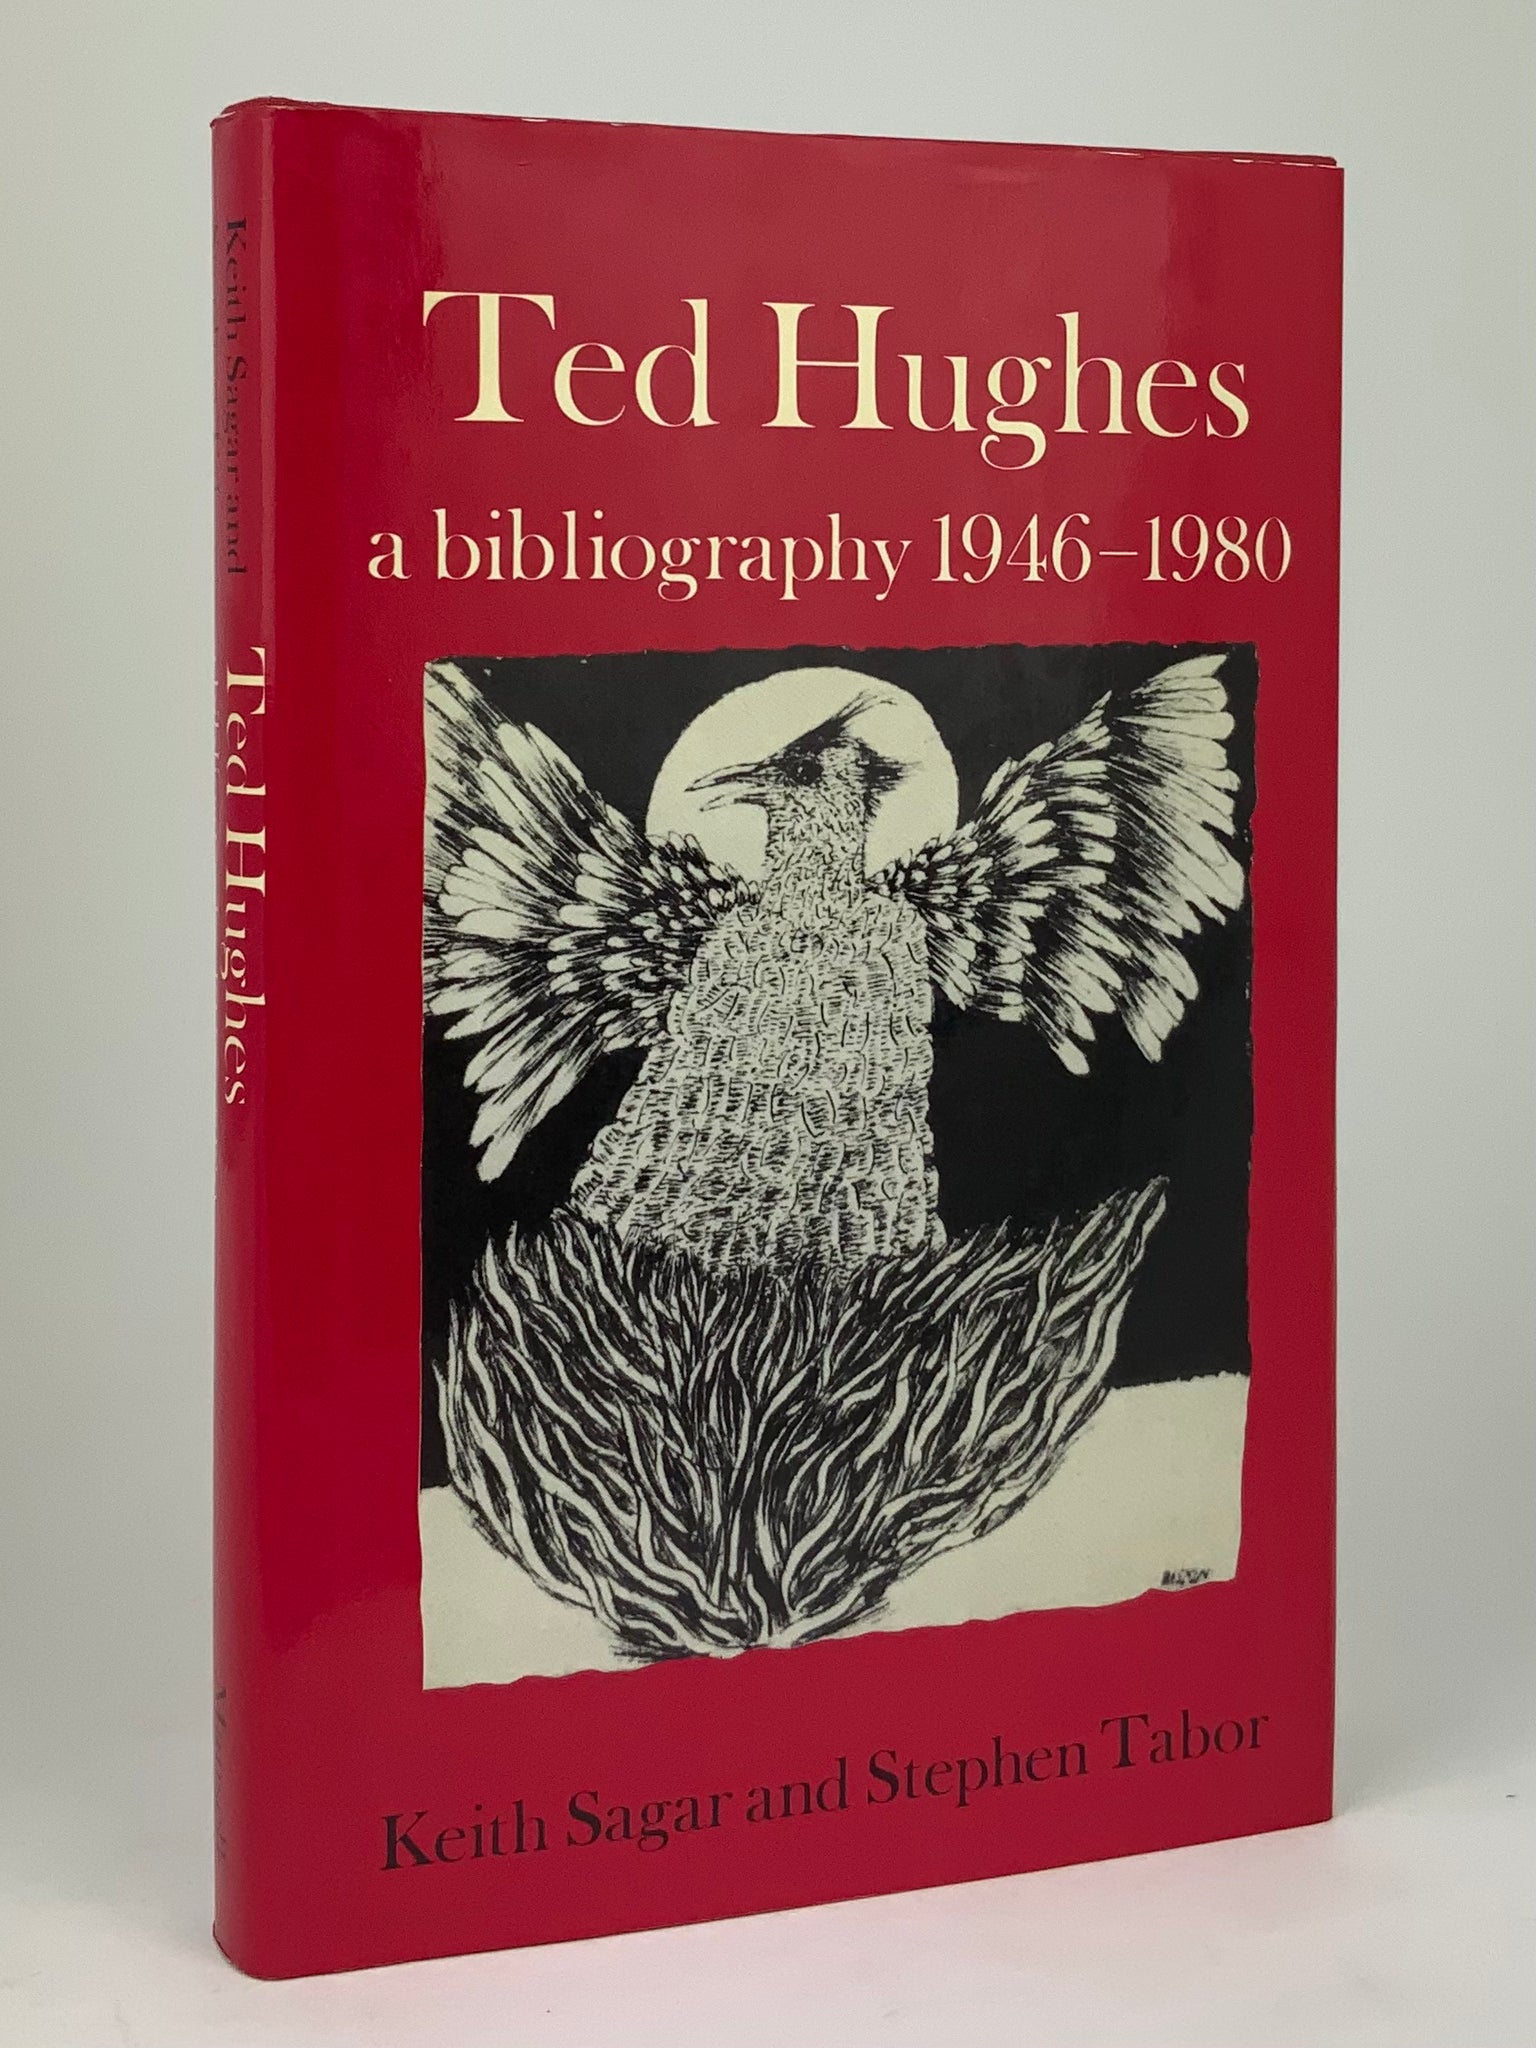 Ted Hughes - A Bibliography 1946-1980